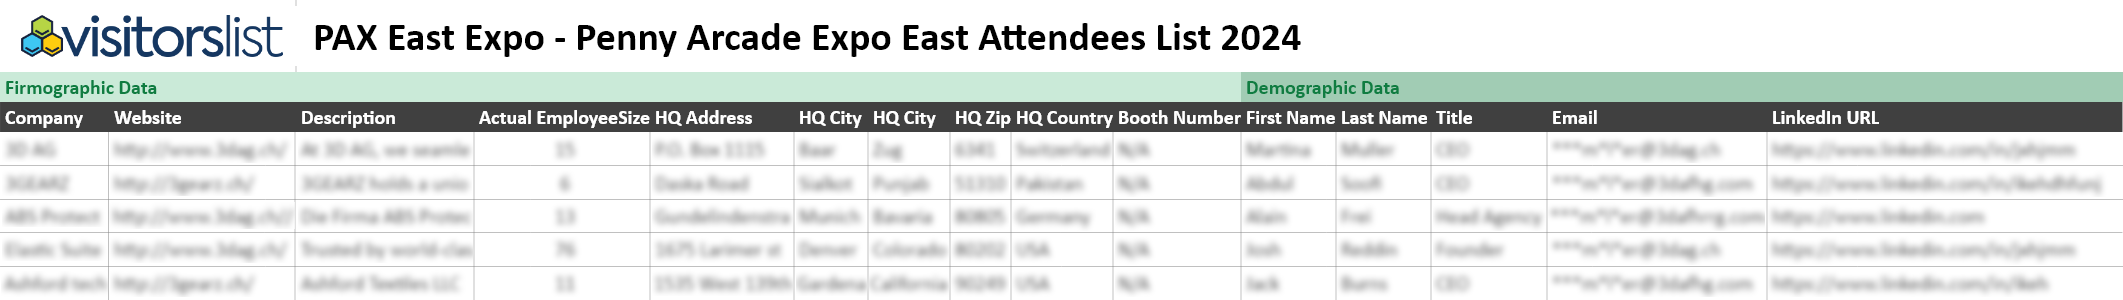 PAX East Expo - Penny Arcade Expo East Attendees List 2024